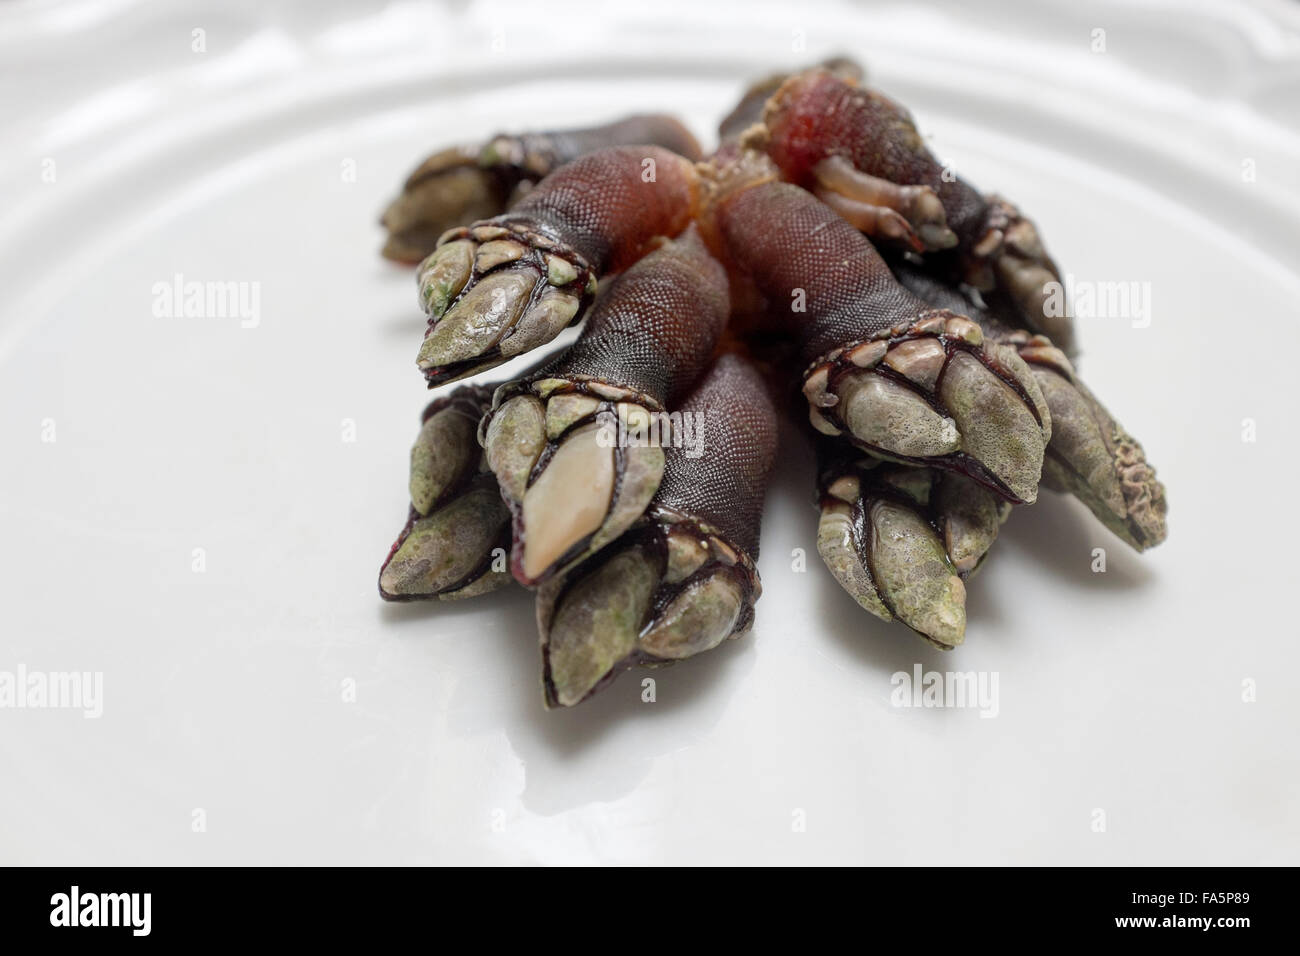 Percebes or Goose Barnacles a Spanish food delicacy especially in Galicia and Asturias Stock Photo